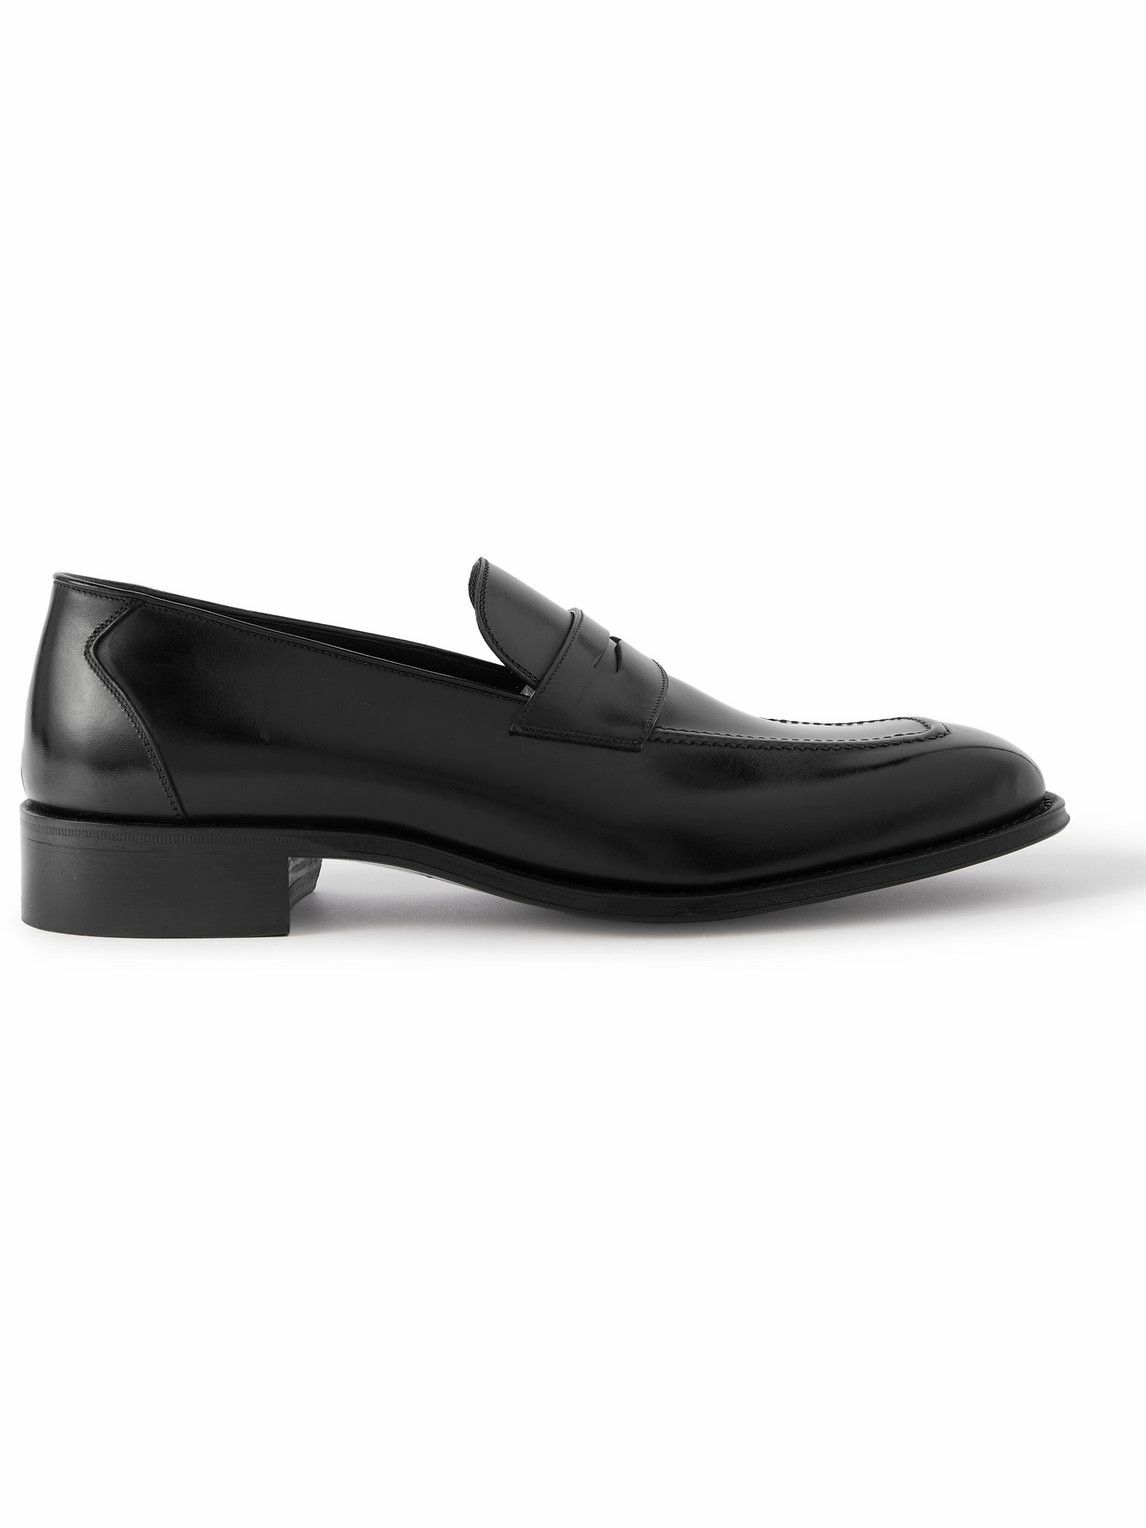 TOM FORD - Claydon Leather Penny Loafers - Black TOM FORD